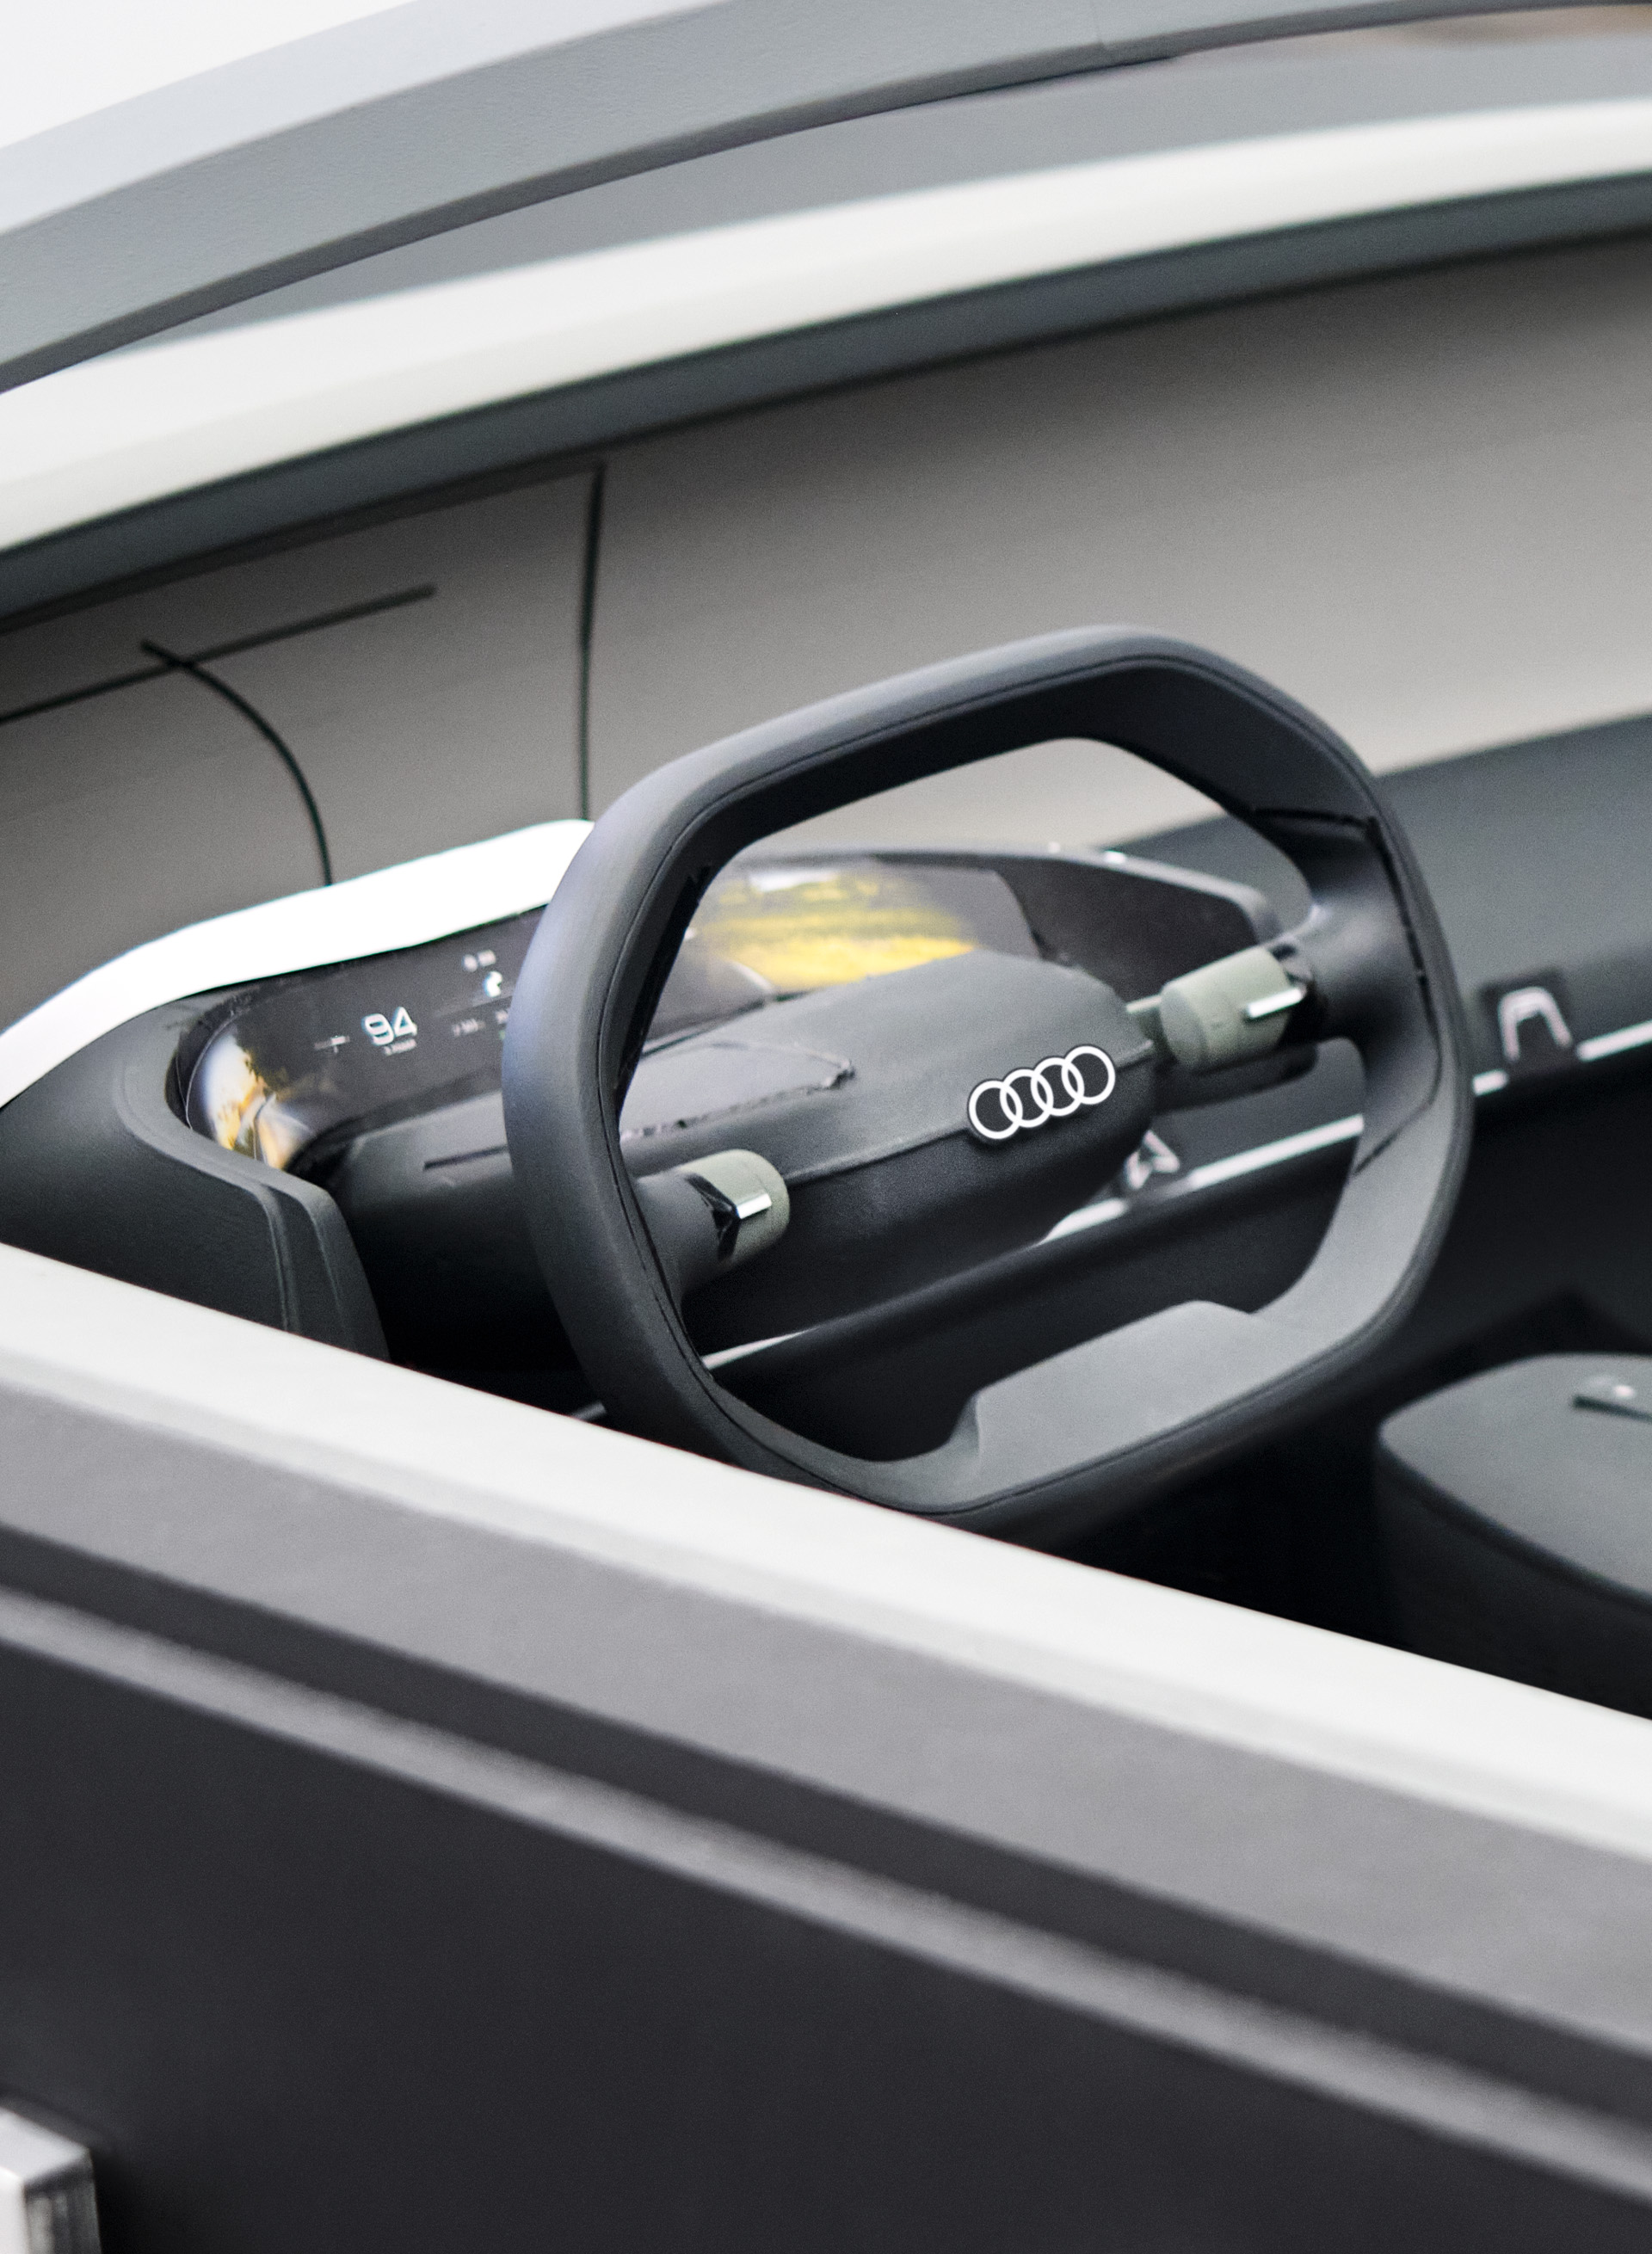 A concept sketch of the steering wheel in the Audi grandsphere concept{ft_concept-car-functions}.